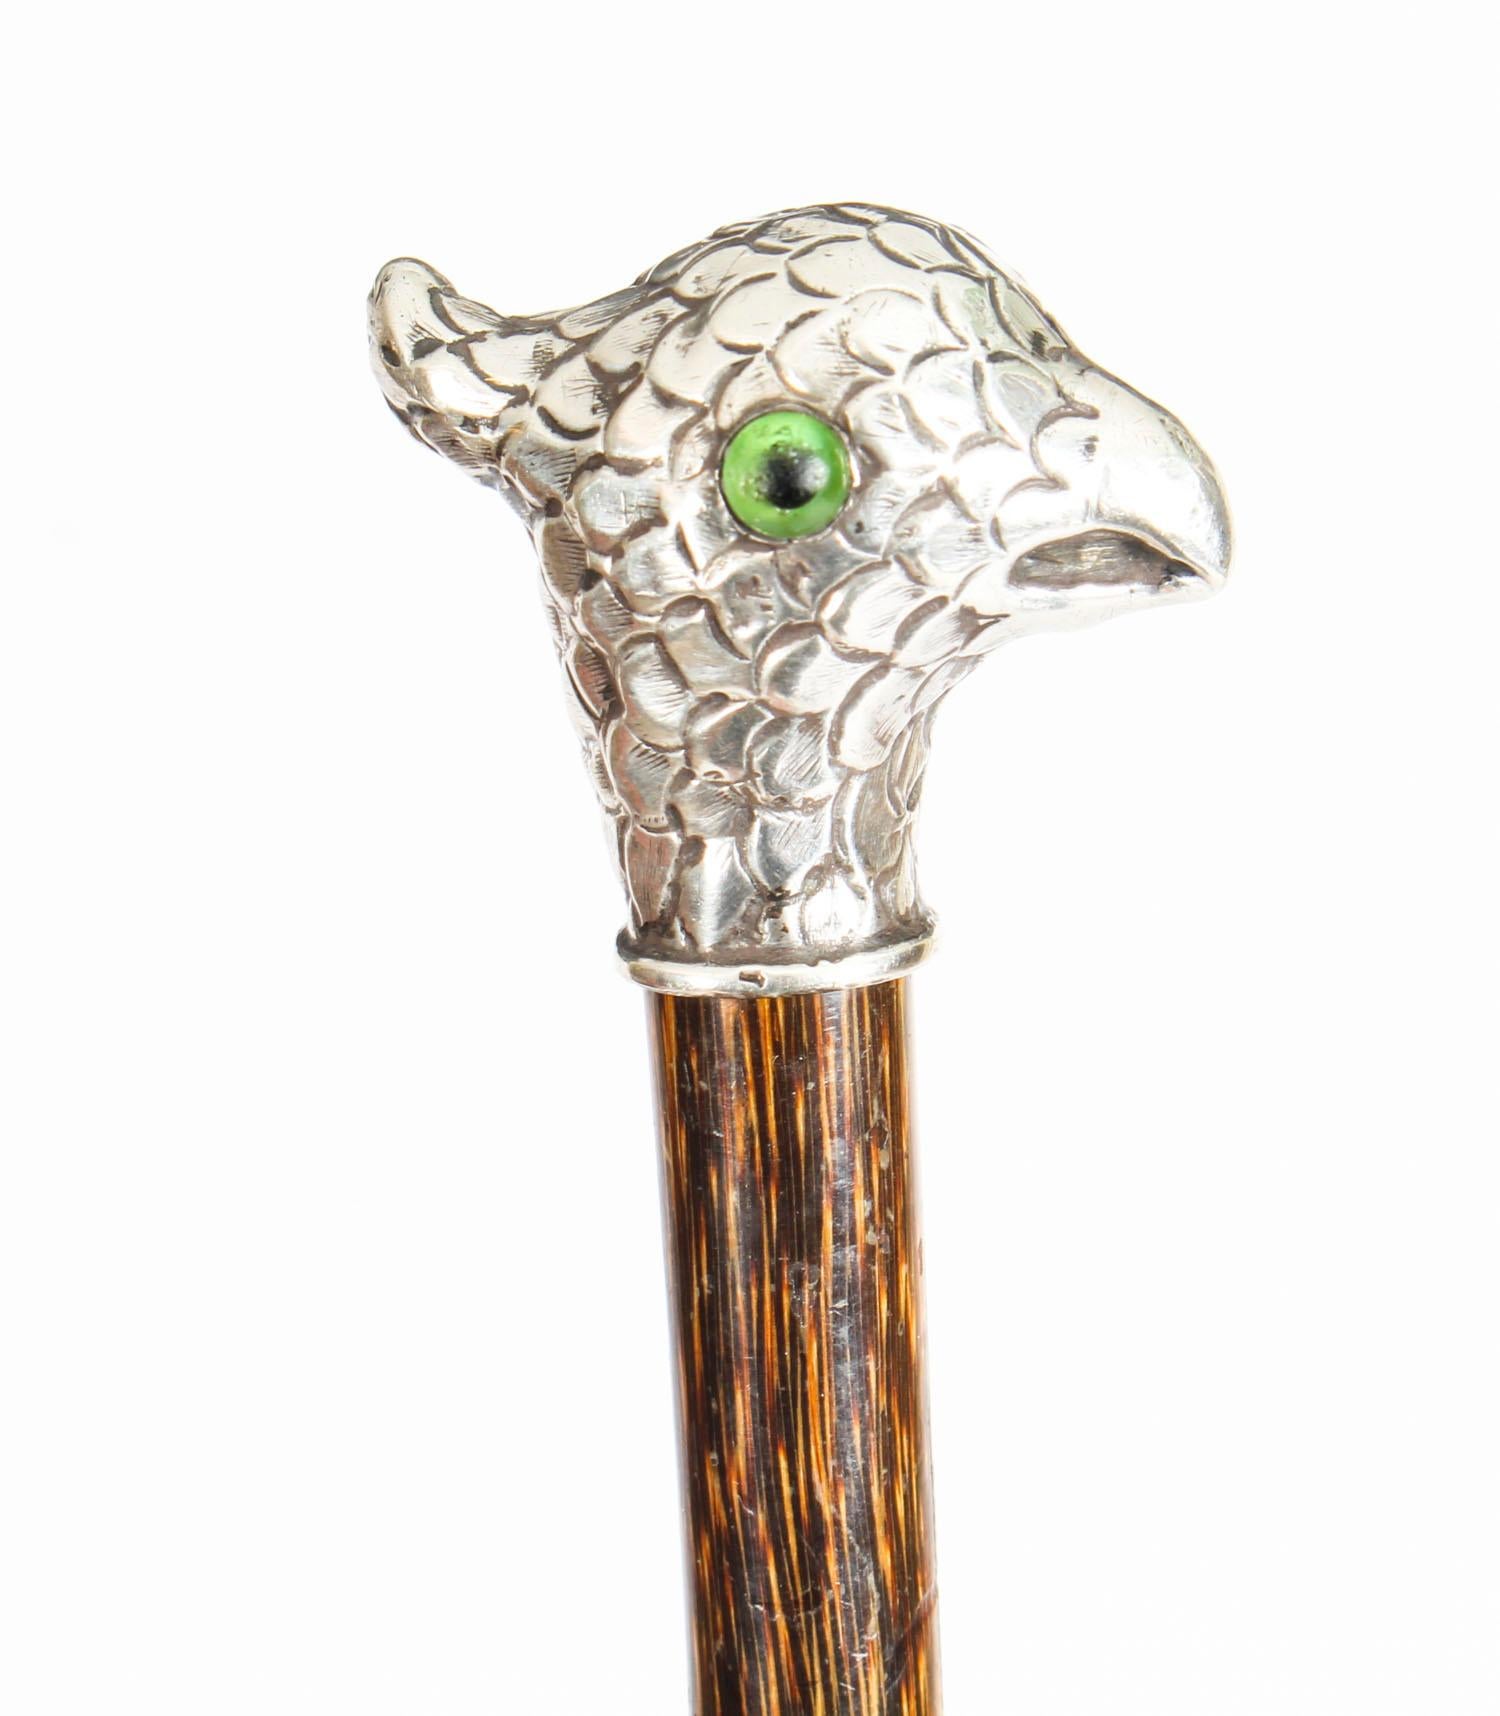 This is a superb French novelty ornithological sterling silver-mounted parakeet and Malacca walking stick, indistinctly hallmarked, circa 1900, circa 20th century.
 
This charming walking cane features a splendid naturalistic bijou handle as a